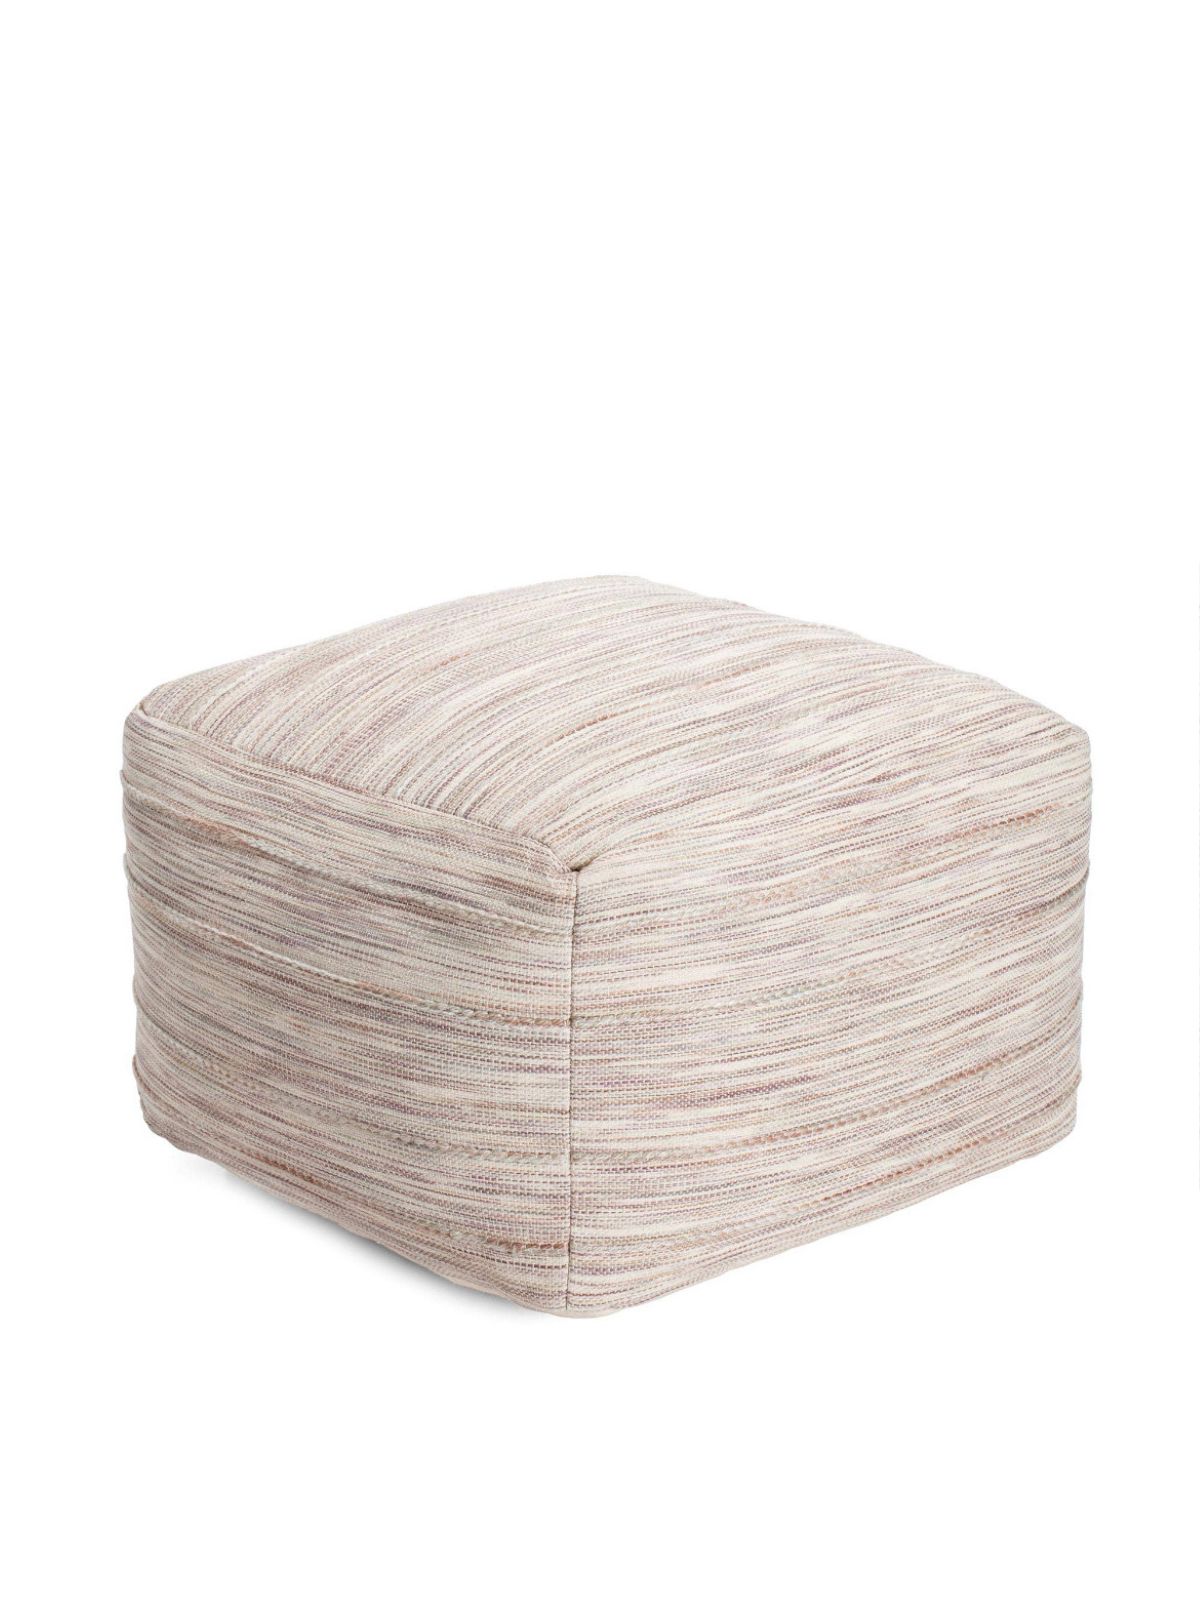 The Gioia Pouf In Tan is Upholstered in a fabric blend that is handcrafted by skilled weavers